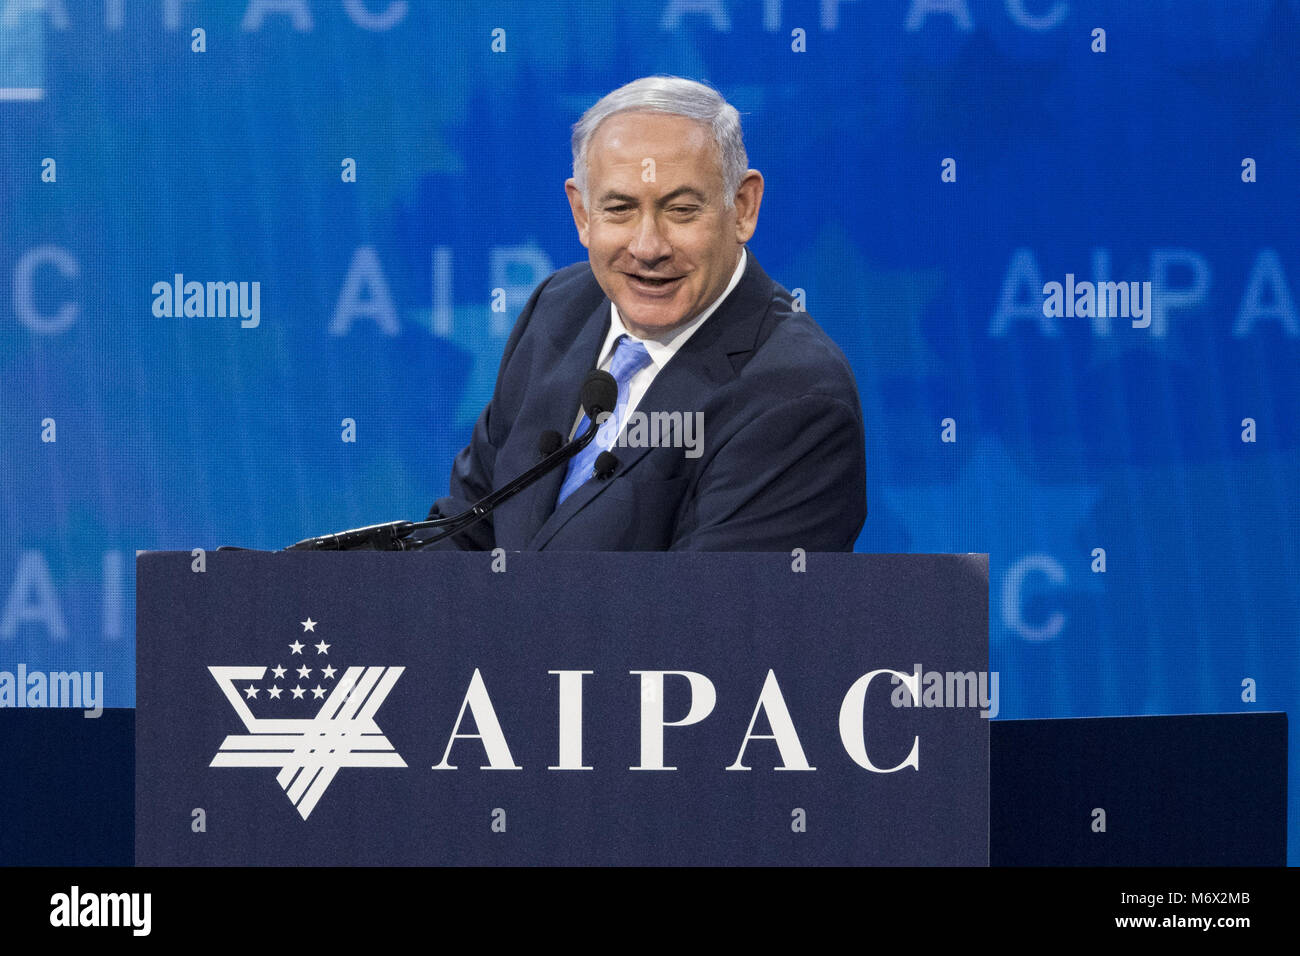 March 6, 2018 - Washington, DC, U.S - BENJAMIN ''BIBI'' NETANYAHU, Prime Minister of Israel, speaking at the AIPAC (American Israel Public Affairs Committee) Policy Conference at the Walter E. Washington Convention Center in Washington, DC on March 6, 2018 (Credit Image: © Michael Brochstein via ZUMA Wire) Stock Photo